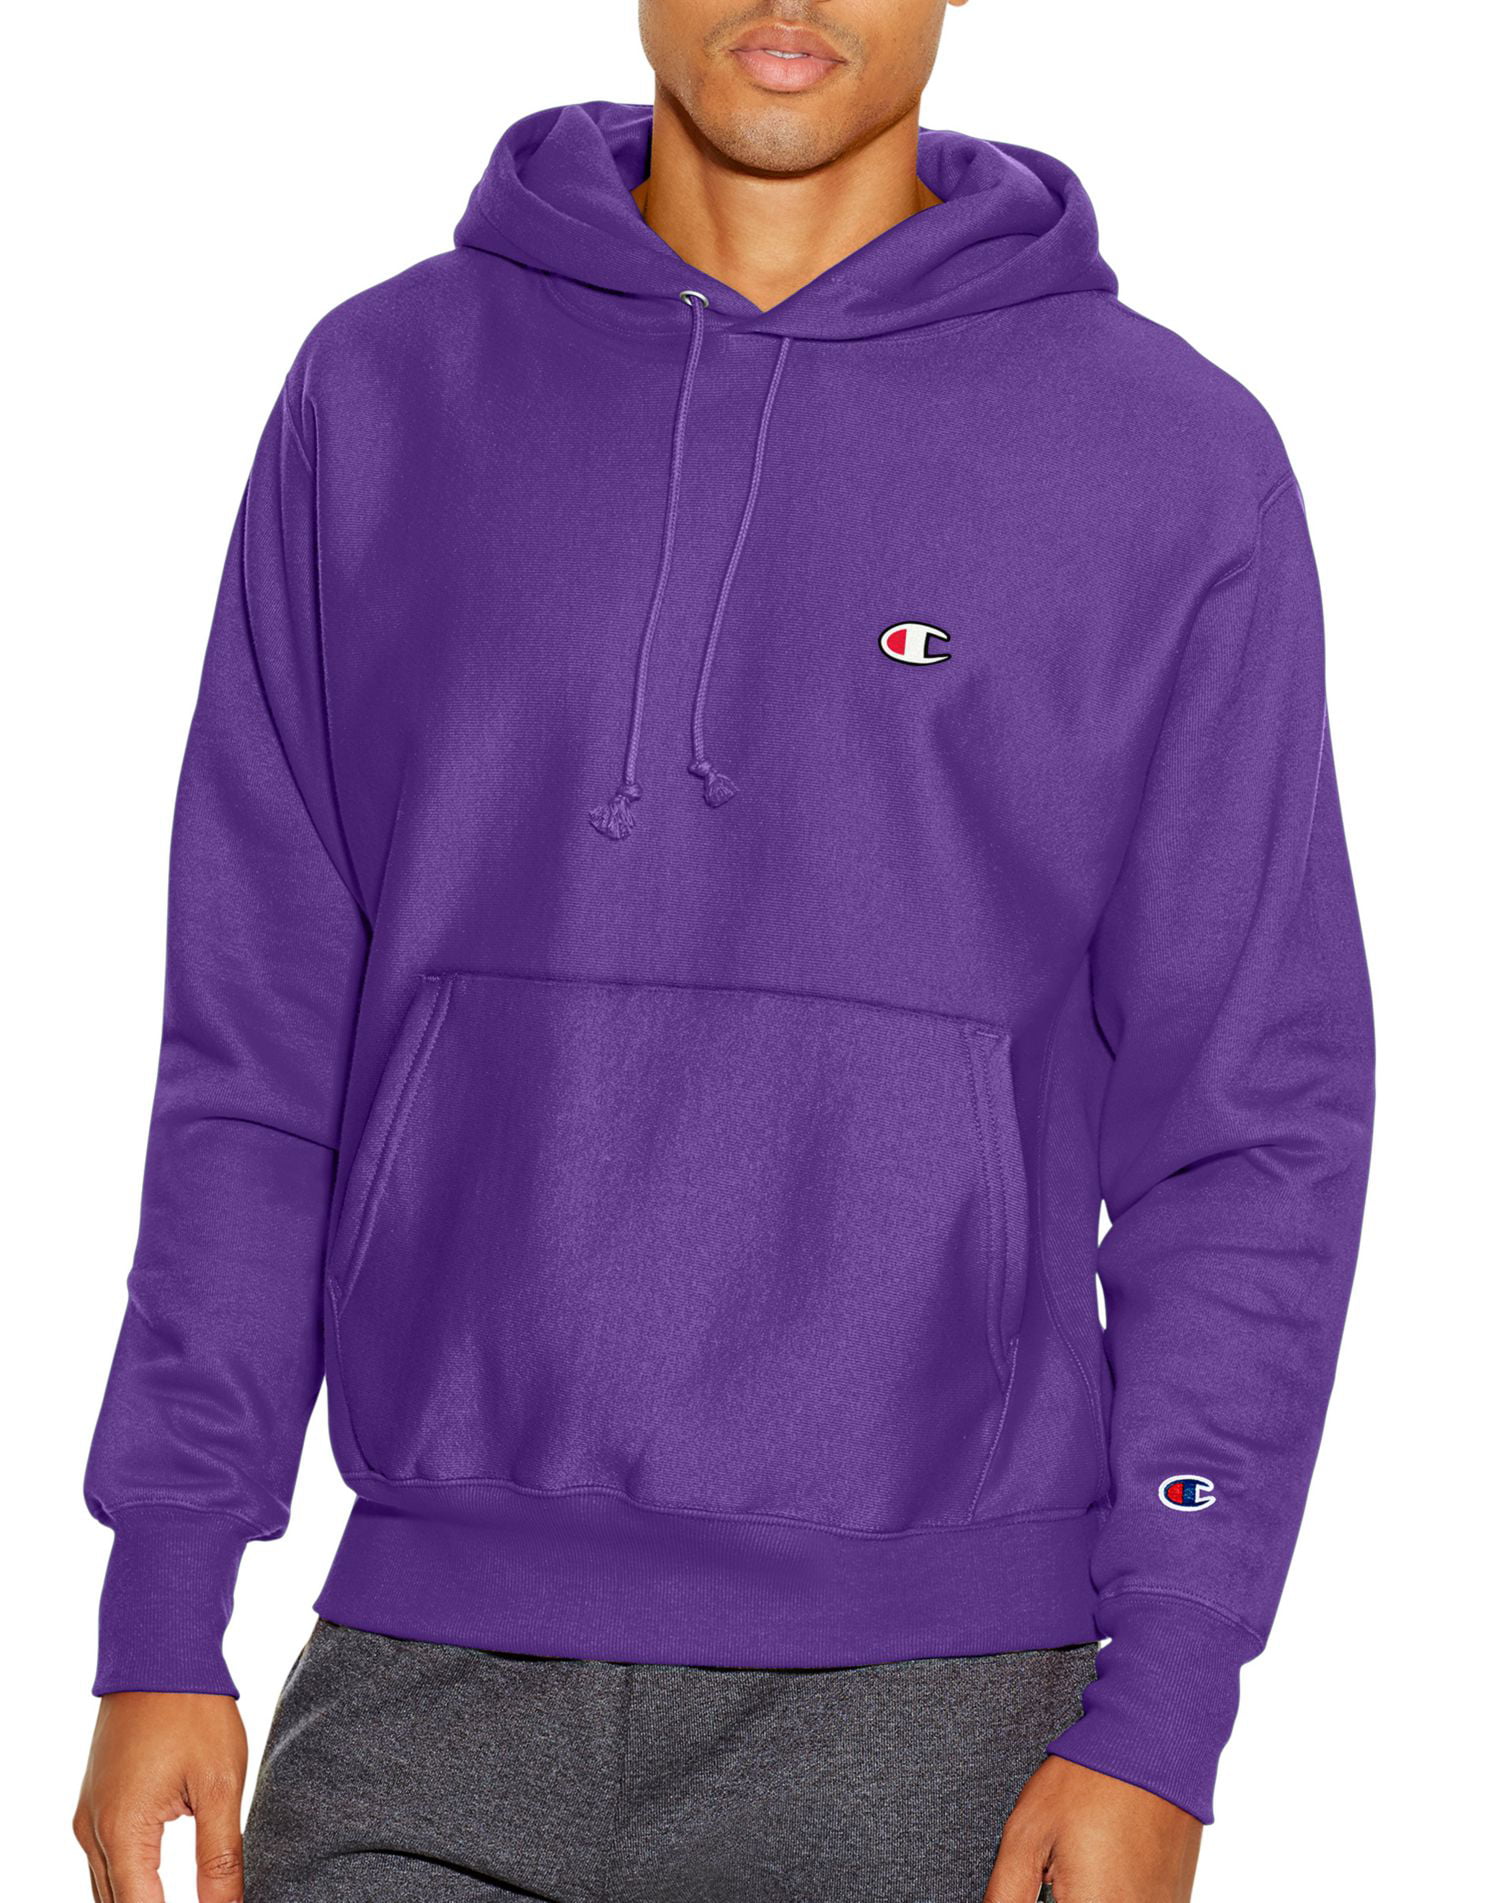 Champion - Champion Life Adult Reverse Weave Pullover Hoodie, XL, 68